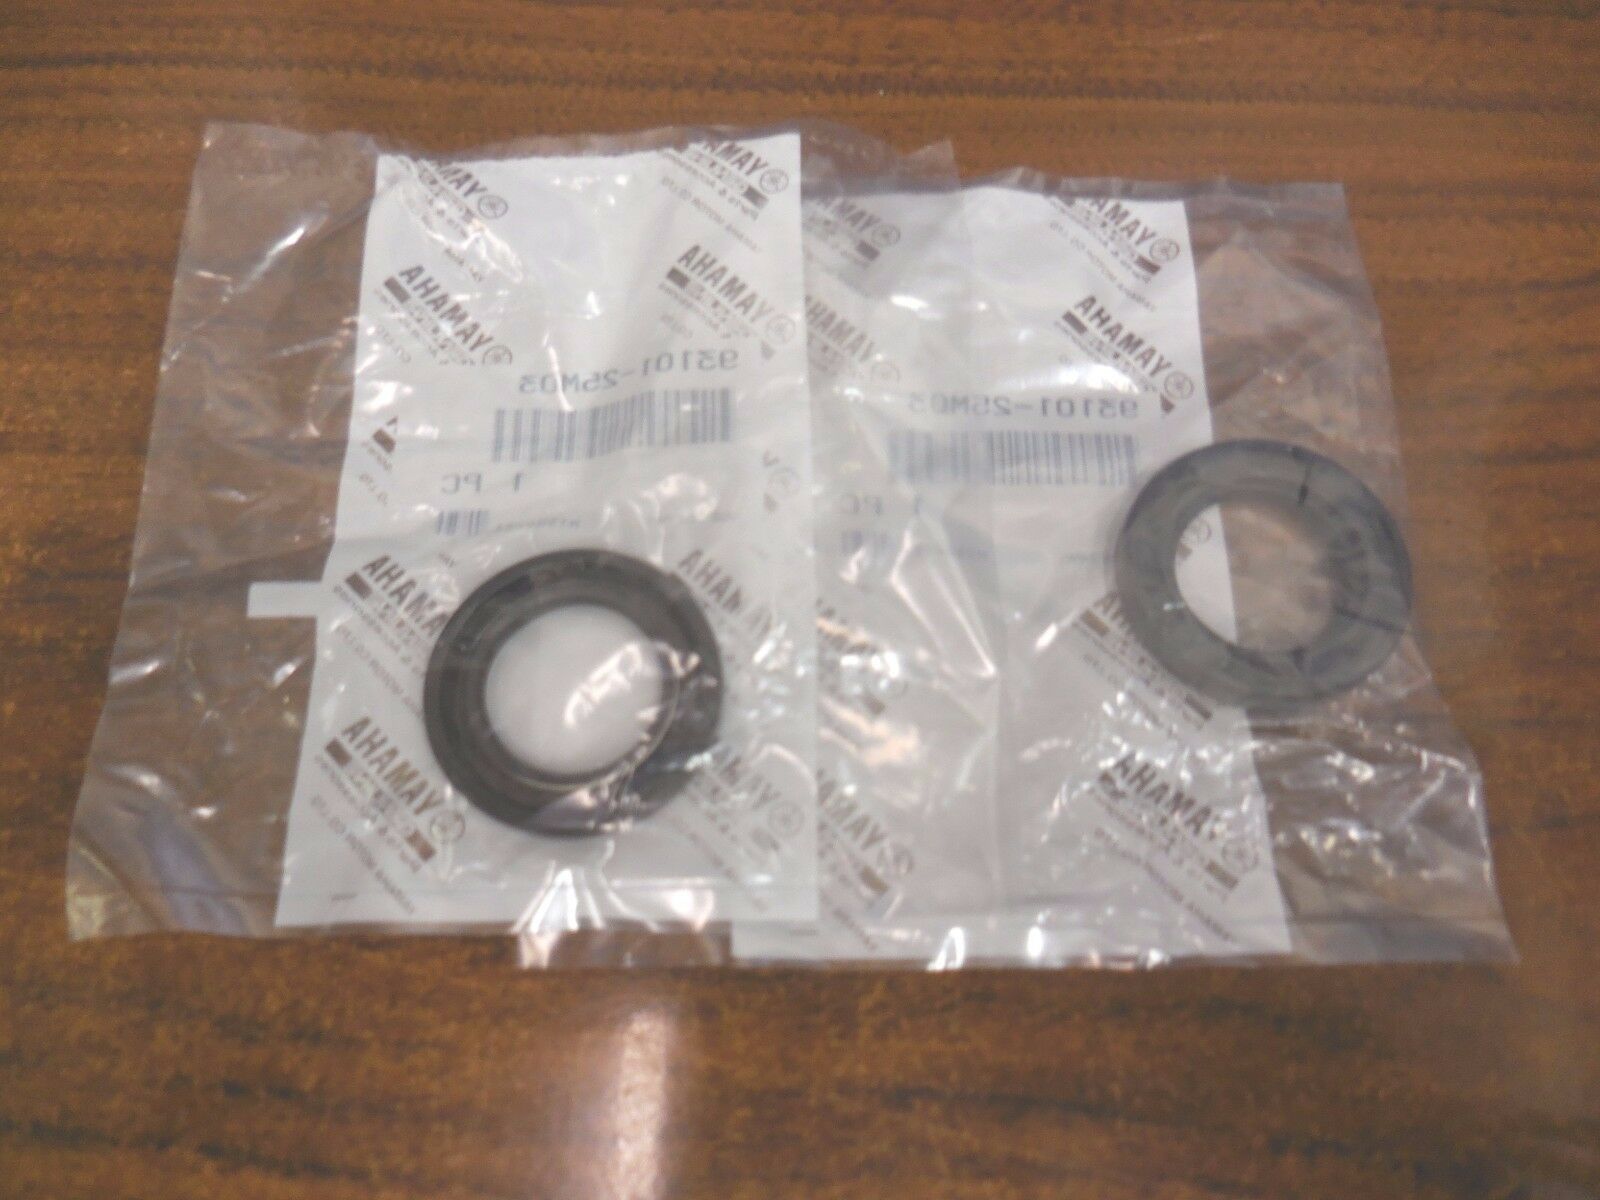 Yamaha Genuine Parts Oem Lower Unit Oil Seal S-type 2 Pack 93101-25m03-00